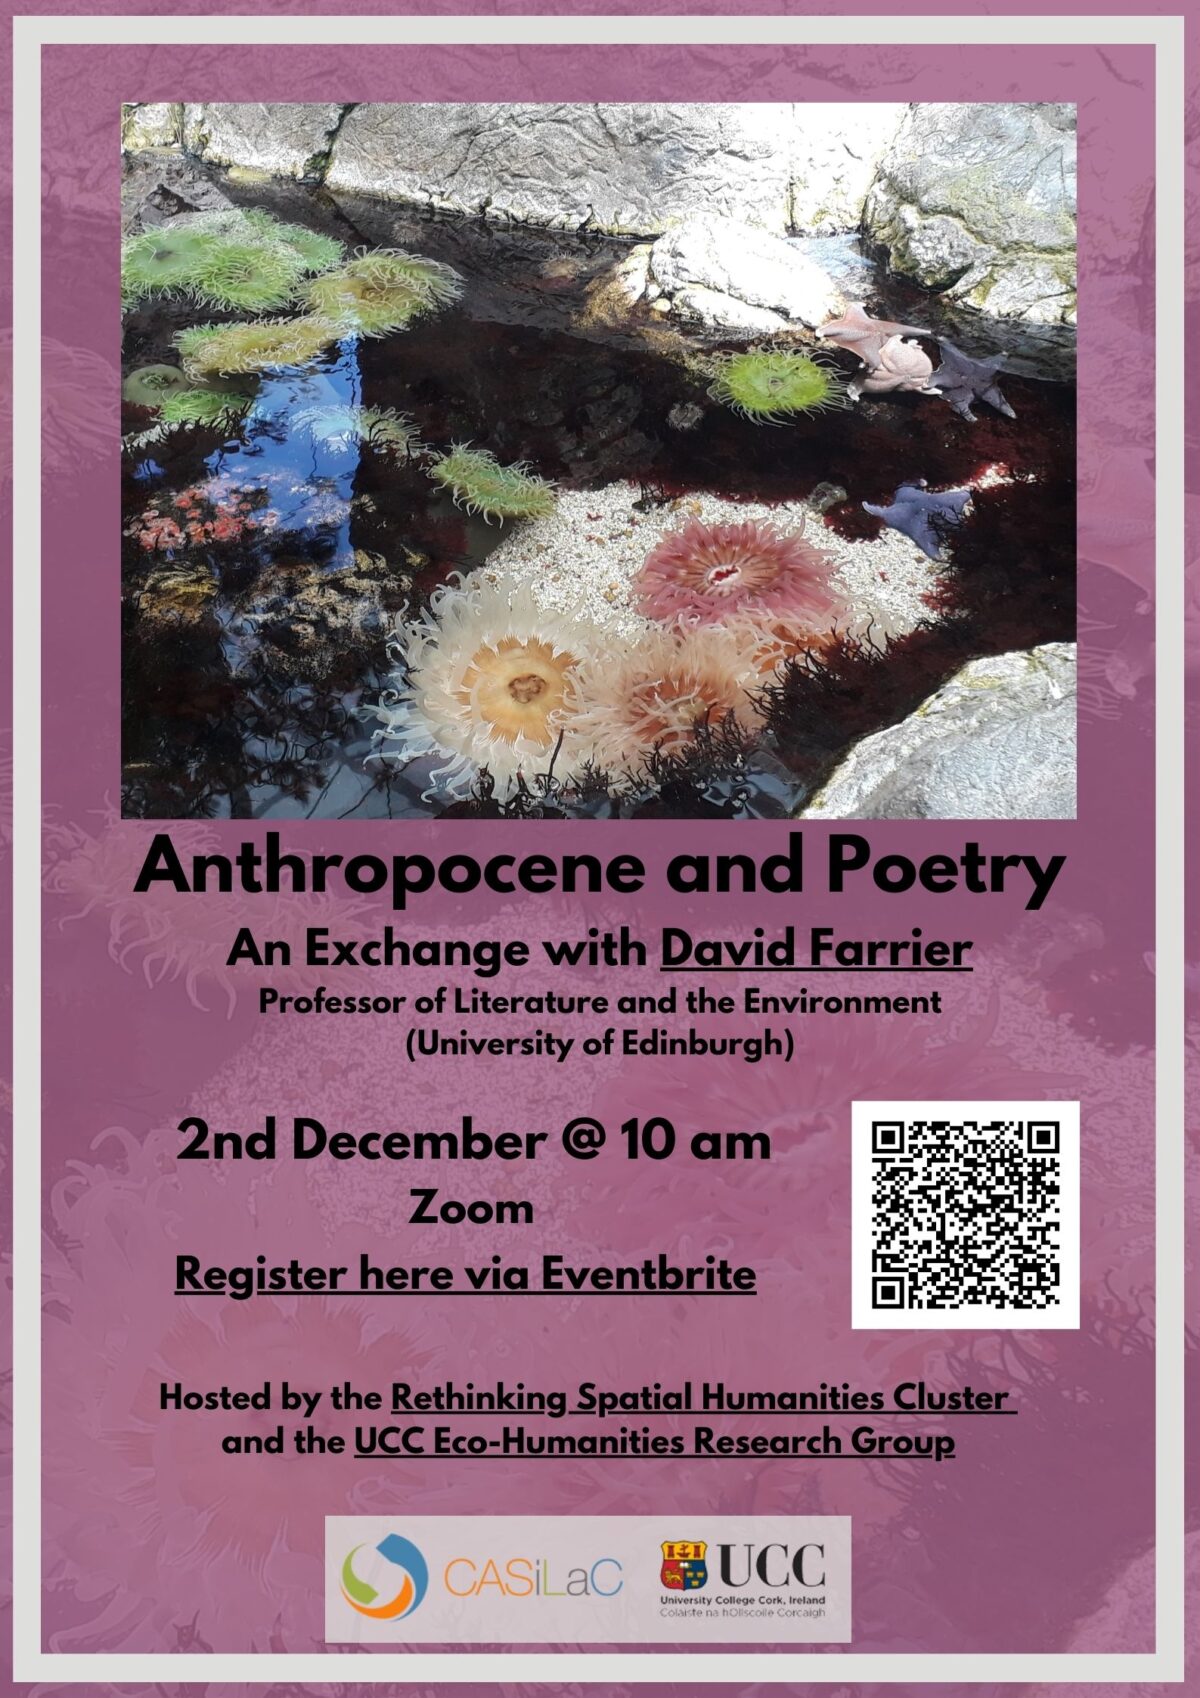 Anthrropocene and Poetry, an exchange with David Farrier, Professor of Literature and the Environment (University of Edinburgh) 2nd December at 10am. Hosted by the Rethinking Spacial Humanities Cluster and the UCC Eco-Humanities Research Group